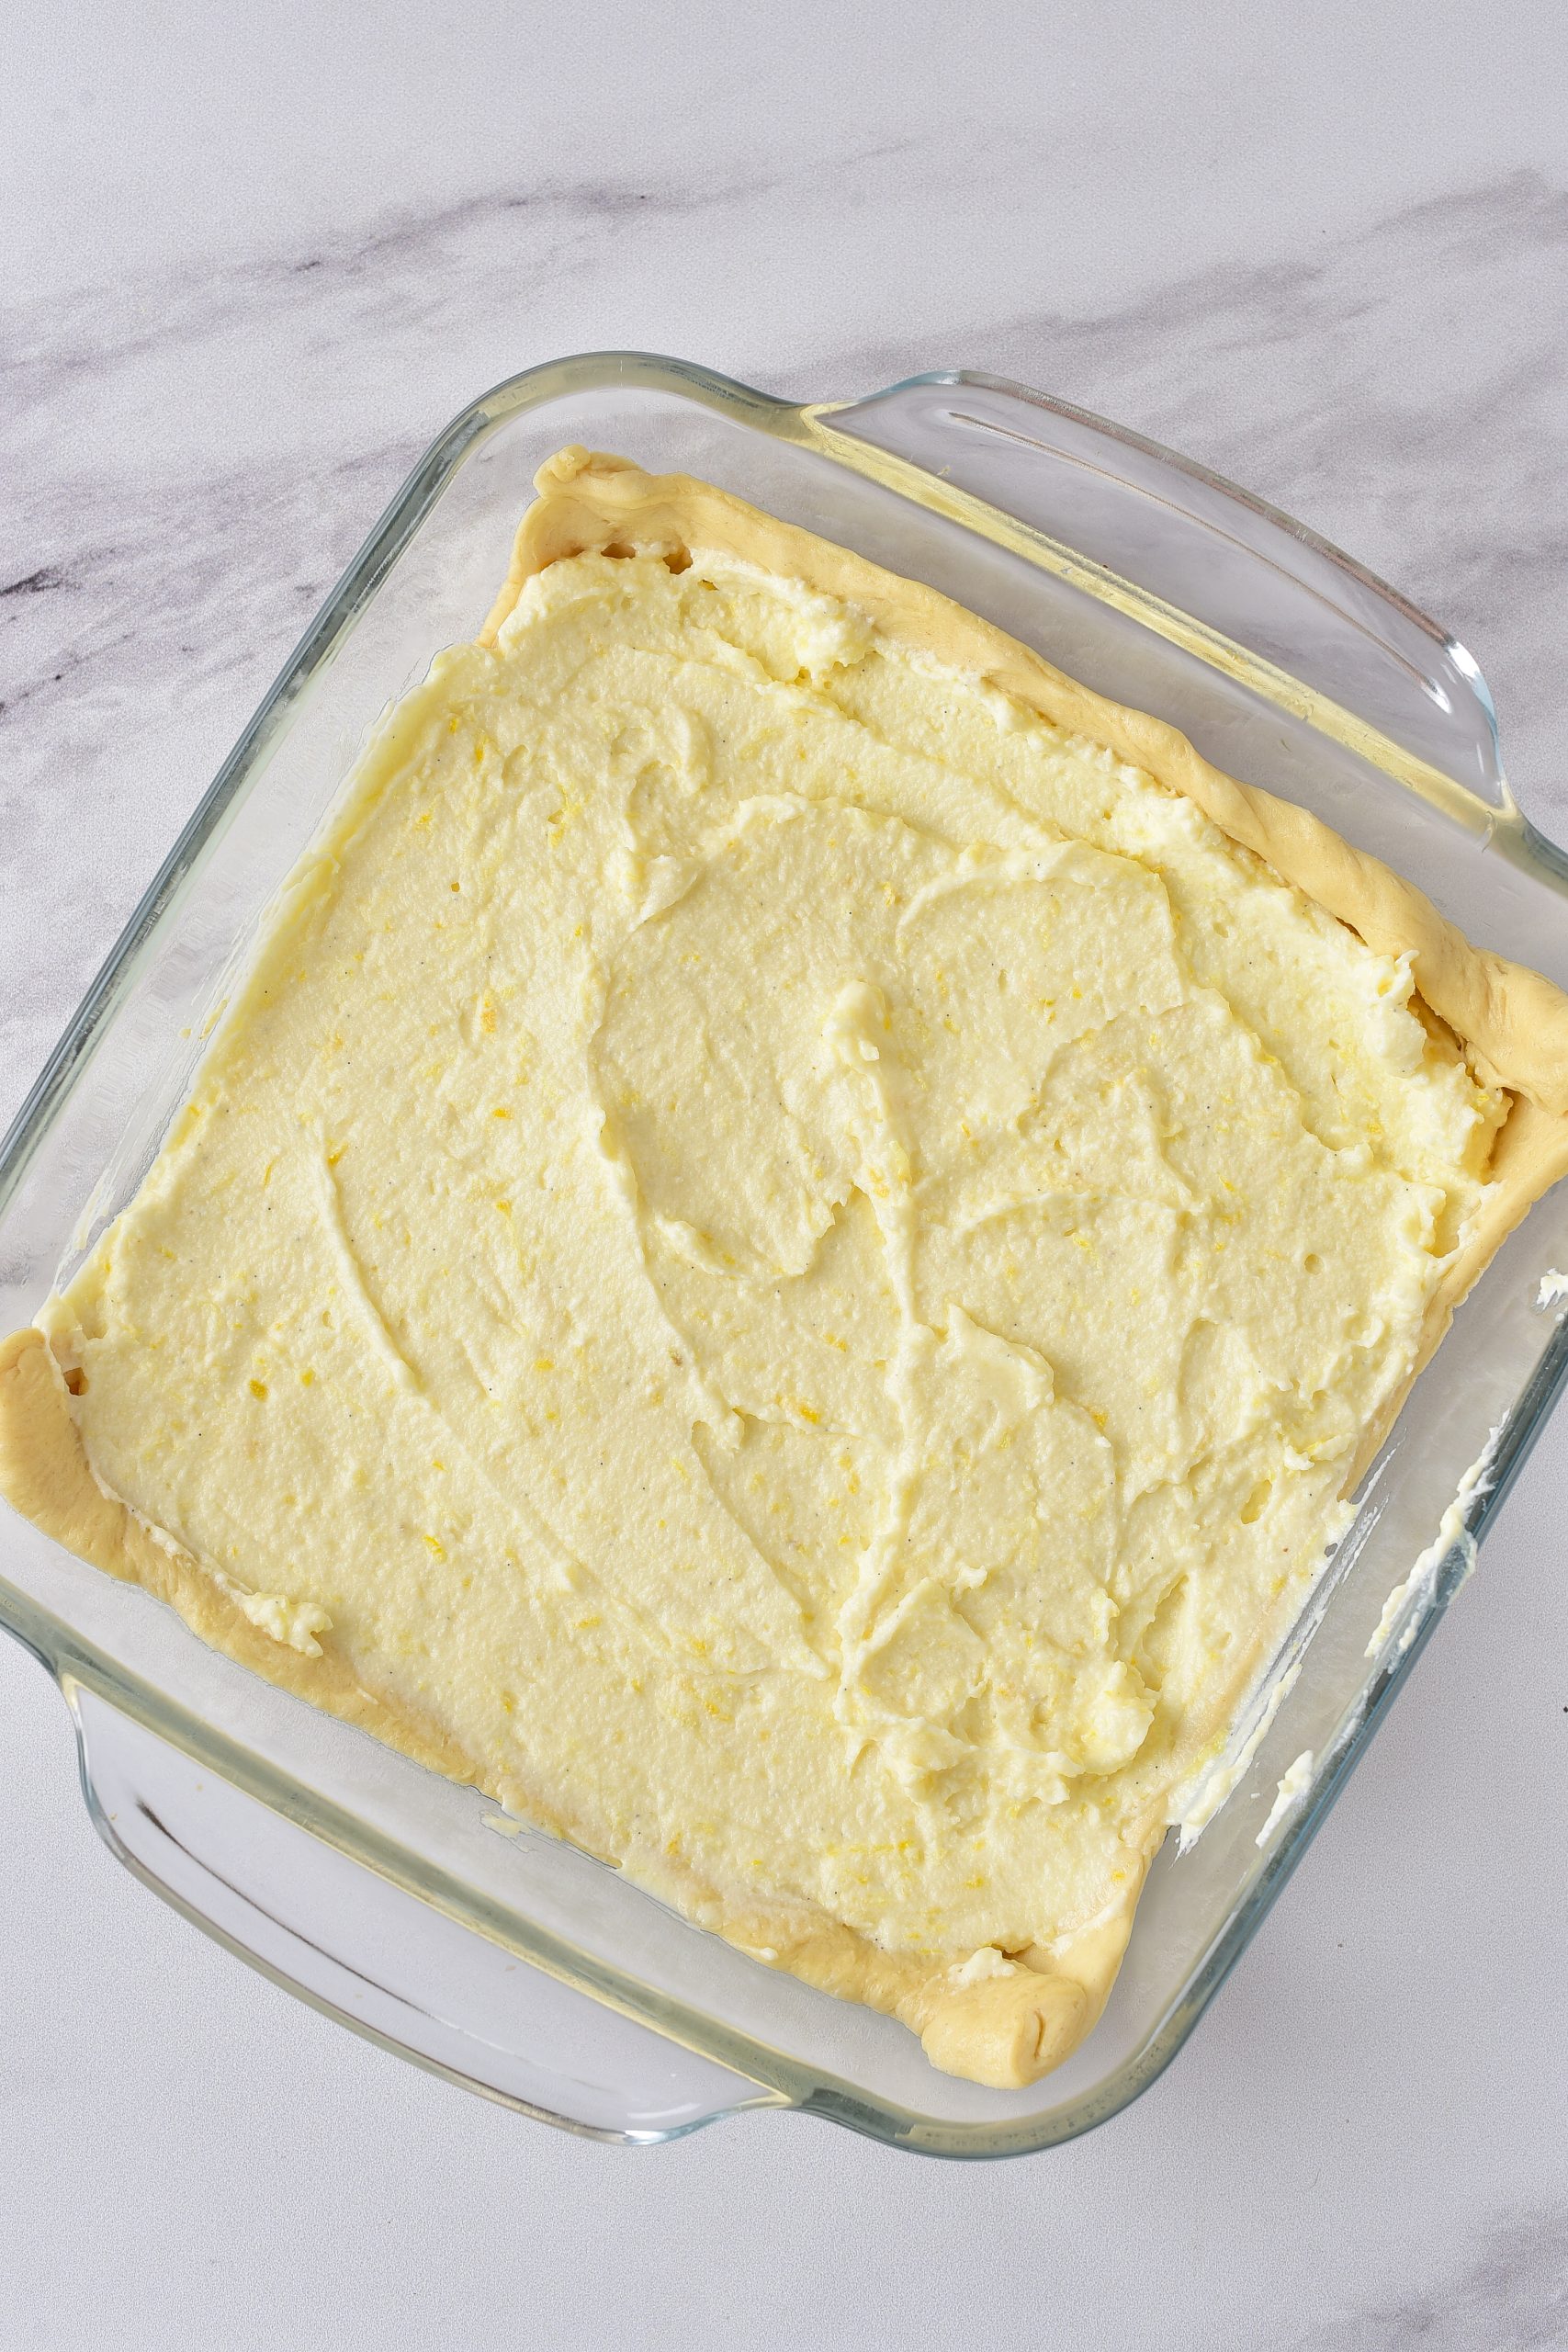 Spread the cream cheese mixture over the layer of dough in the baking dish